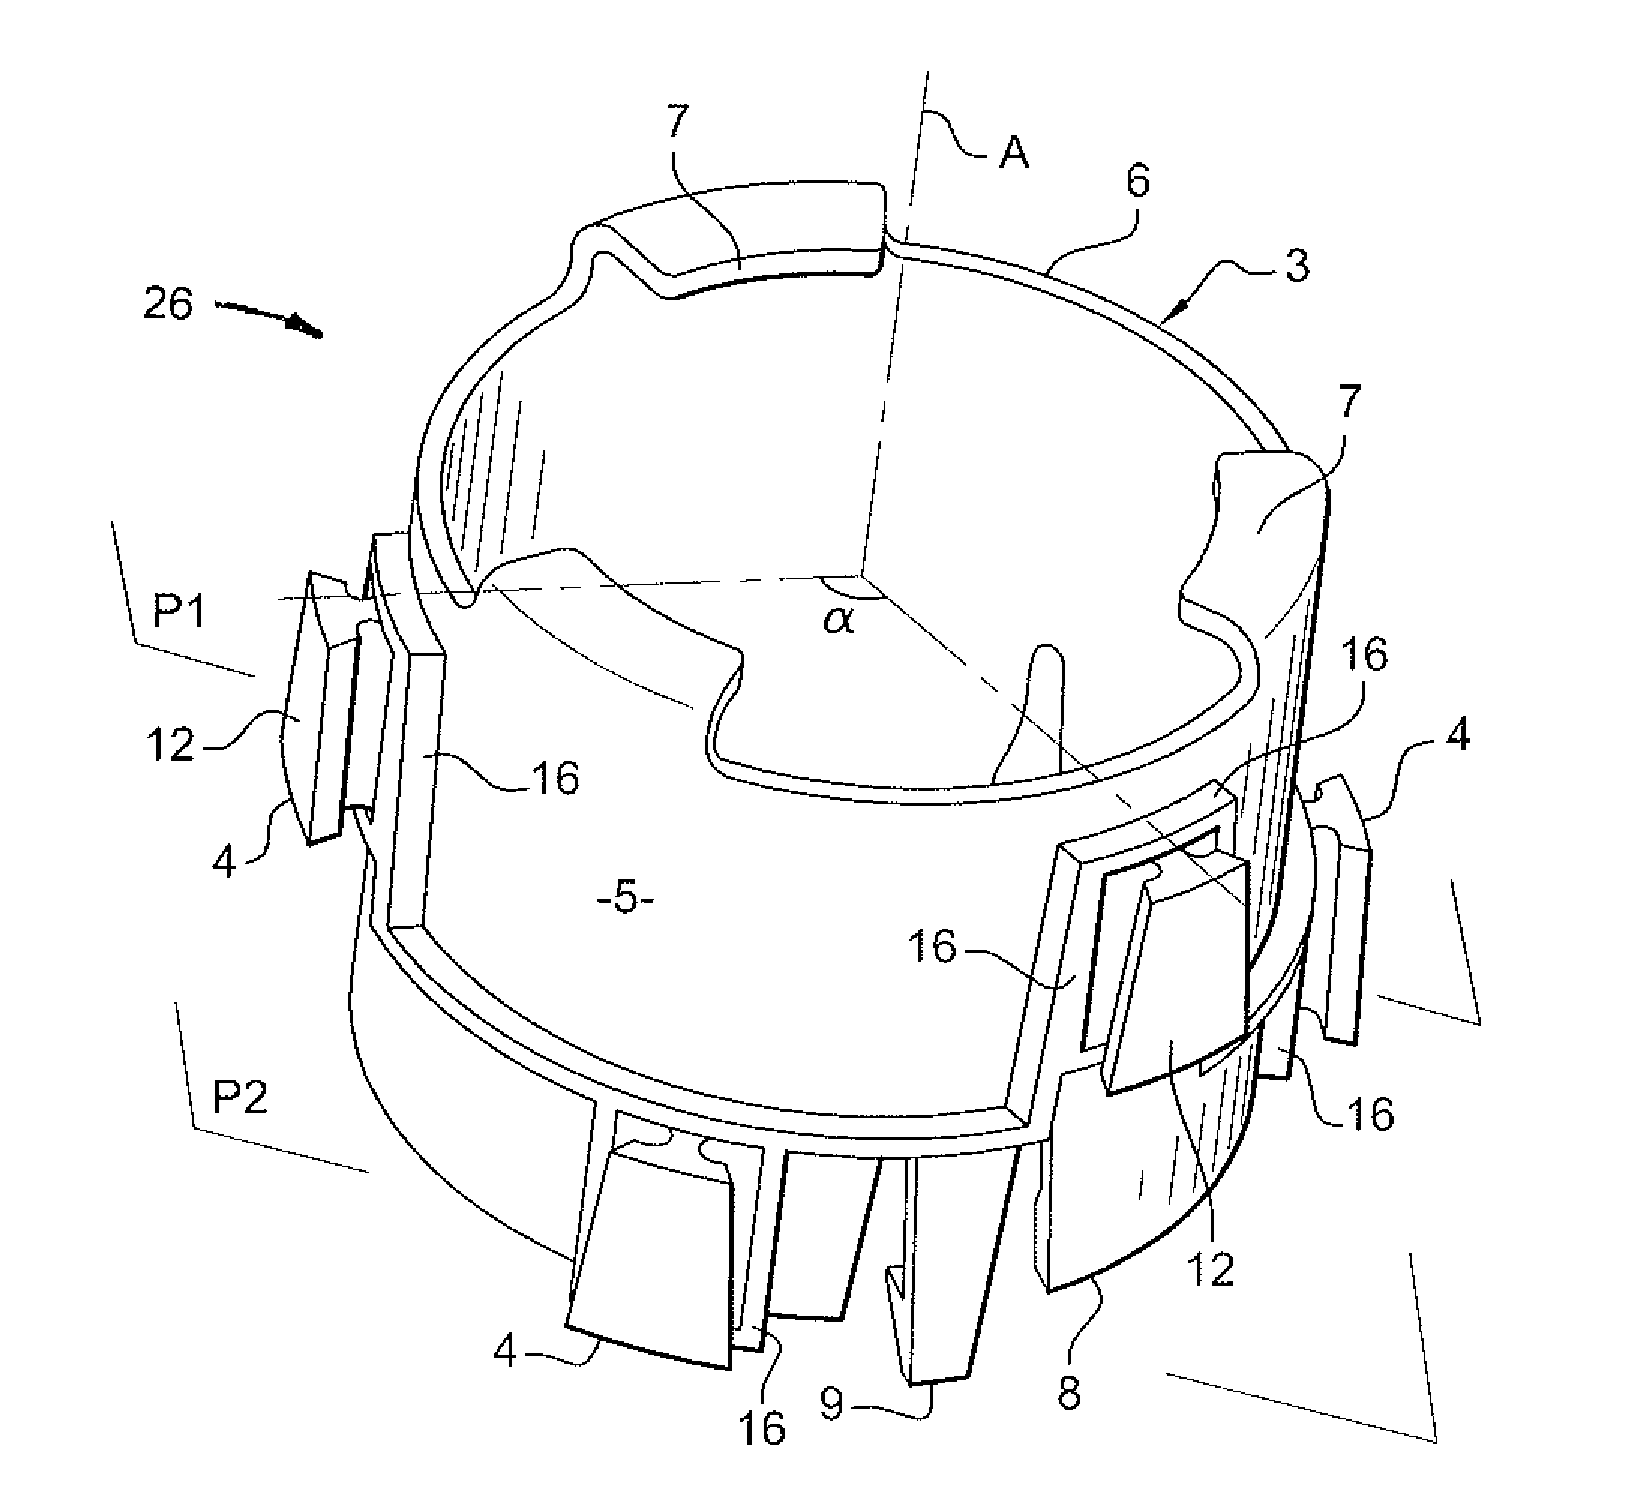 Motor support device for heating, ventilation and/or air-conditioning system